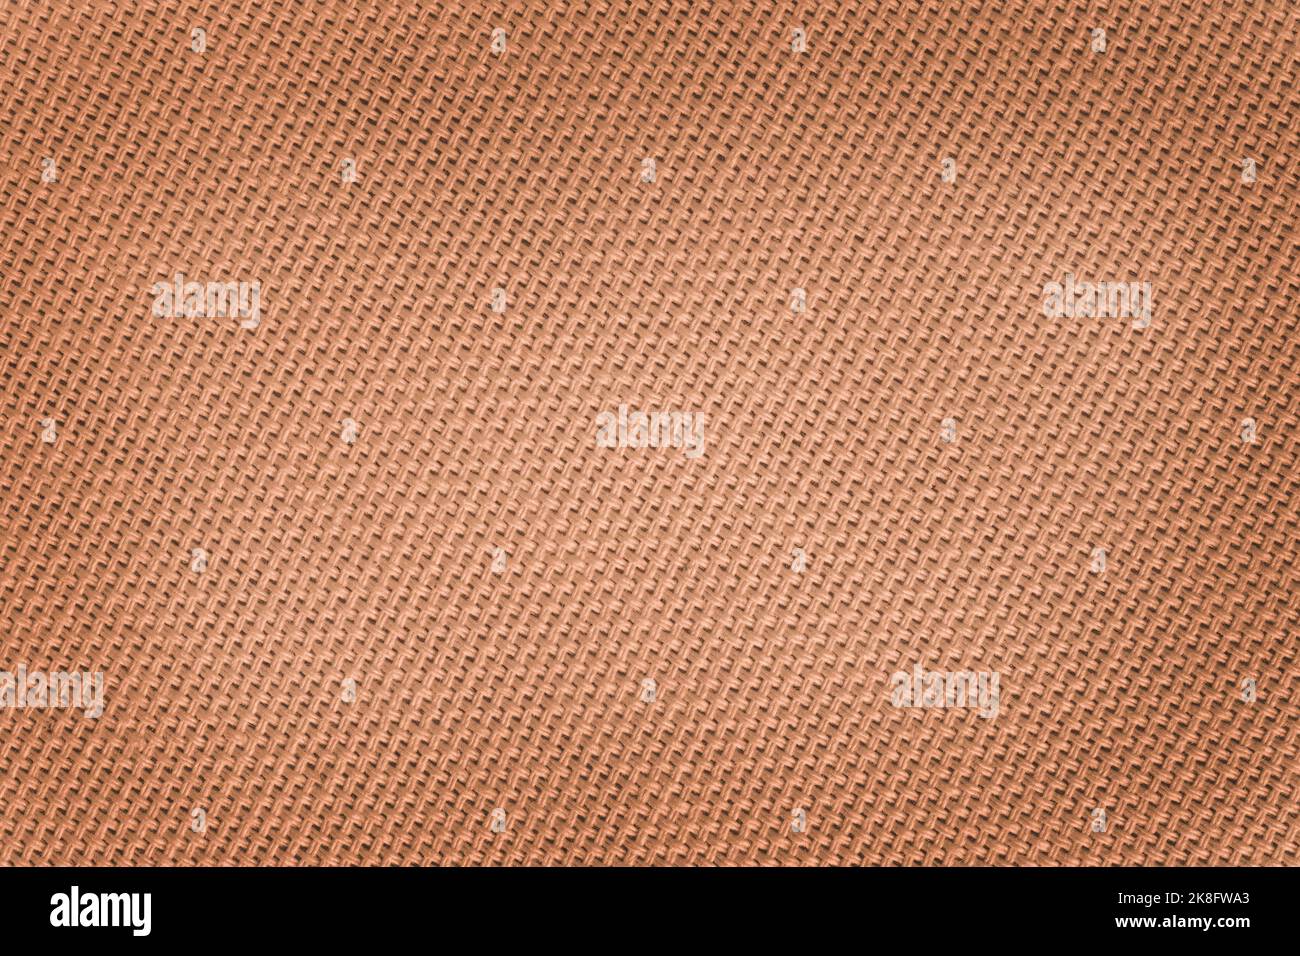 close up of blank brown canvas texture enlighted at centre Stock Photo